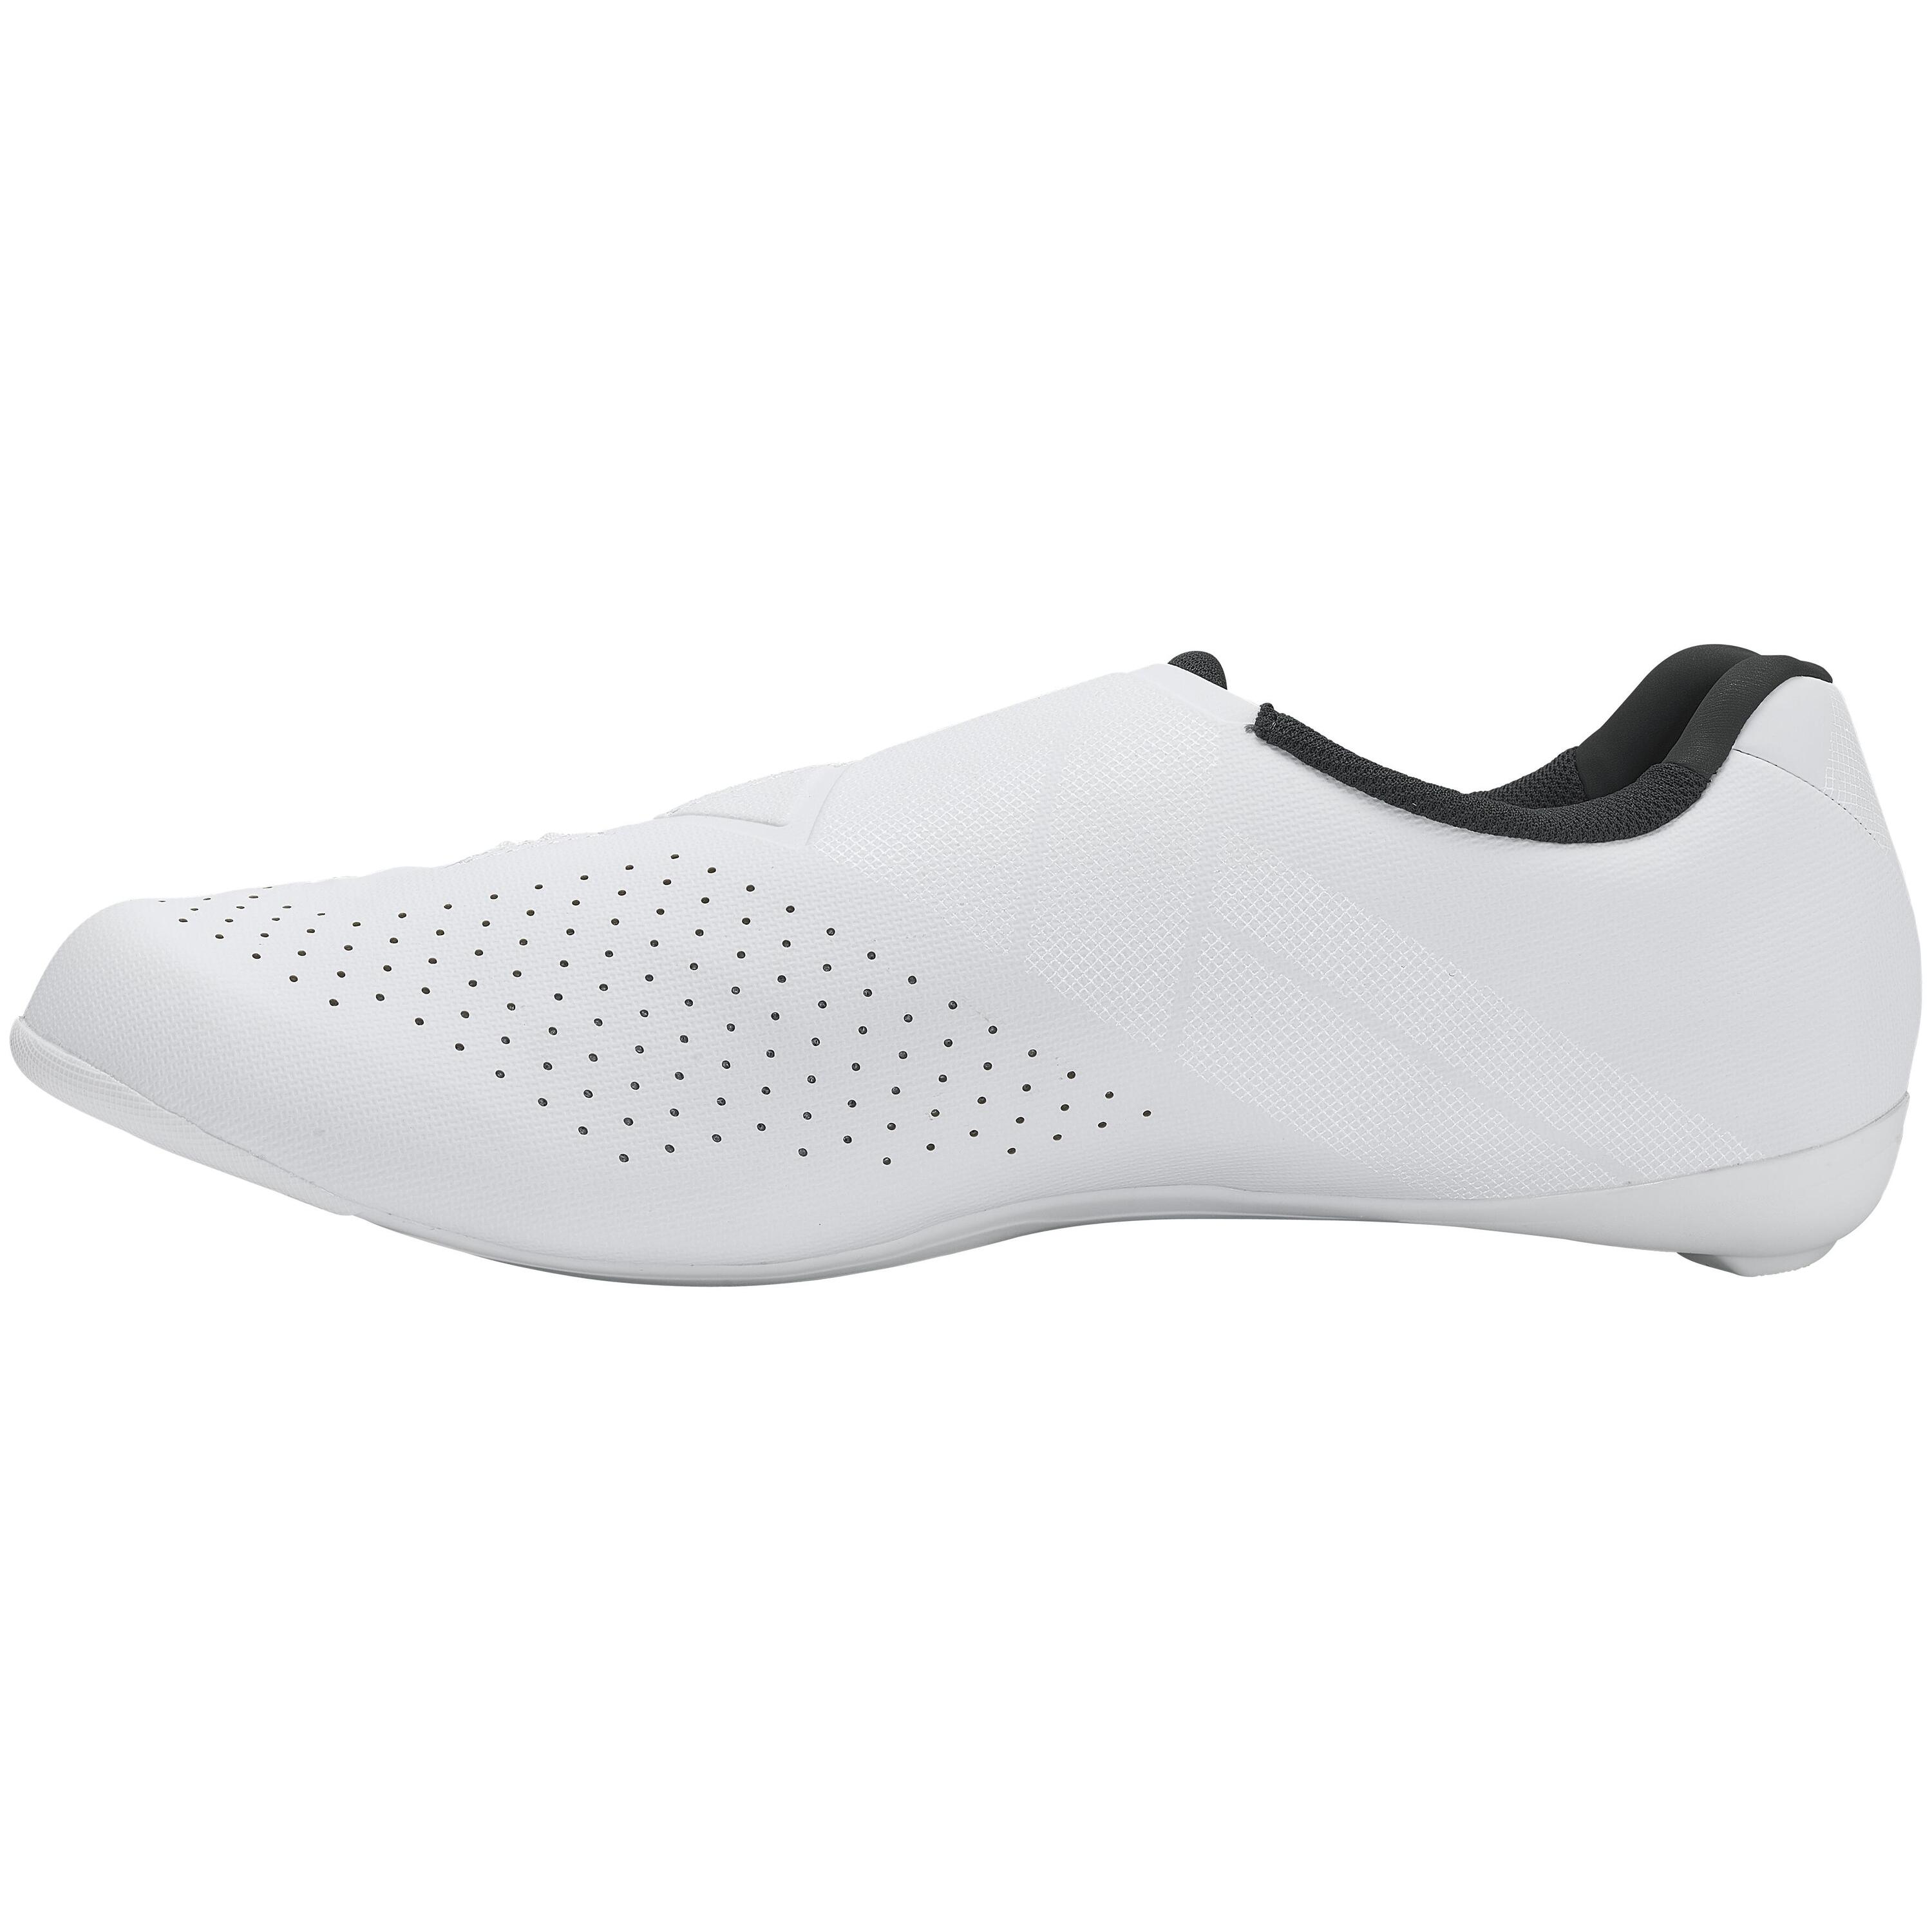 Road Cycling Shoes RC3 - White 3/7